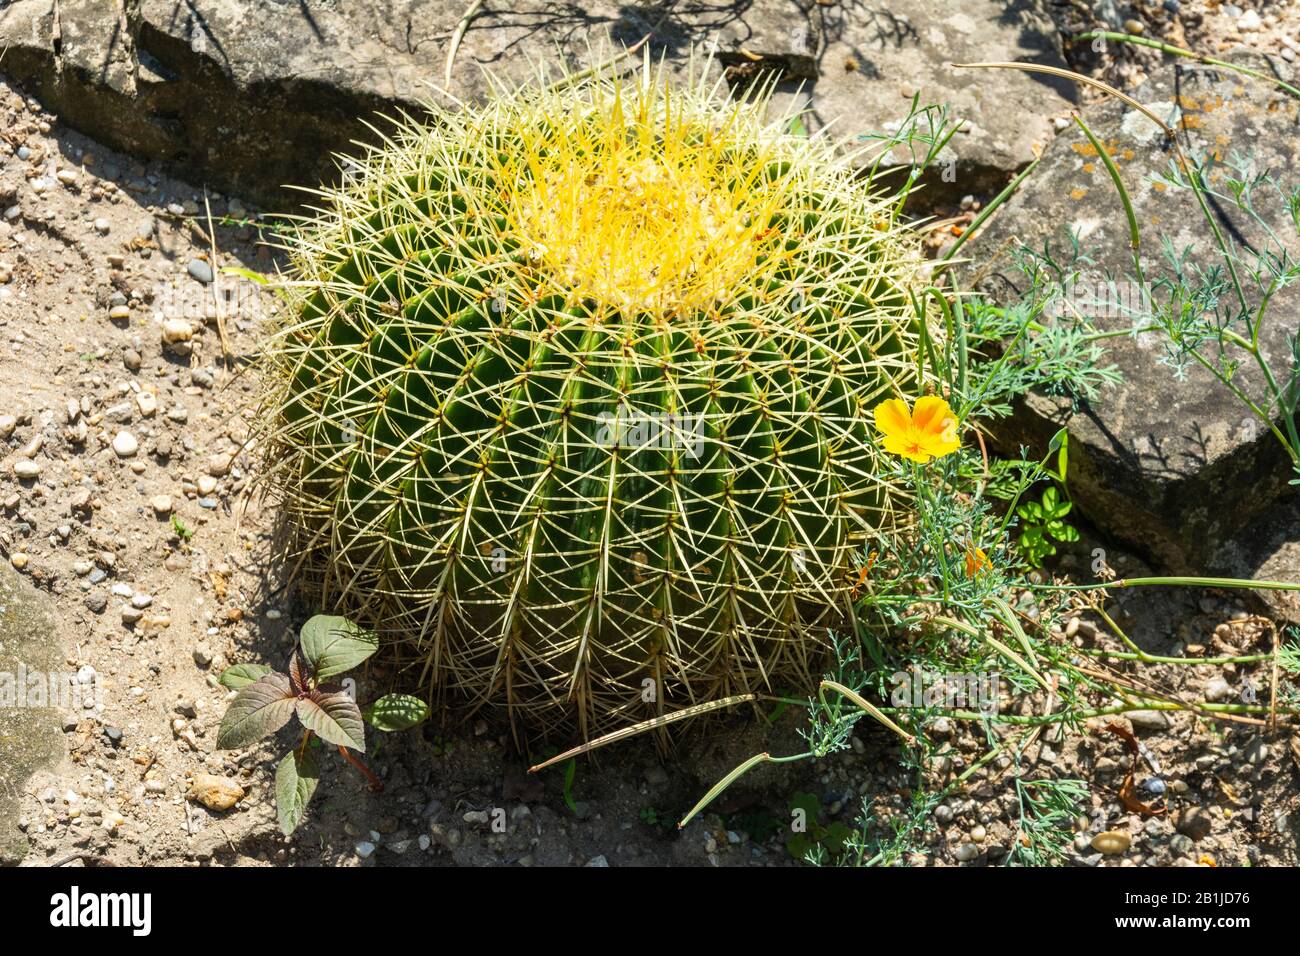 Echinocactus grusonii cactus, popularly known as the golden barrel cactus, is endemic to east-central Mexico. Stock Photo